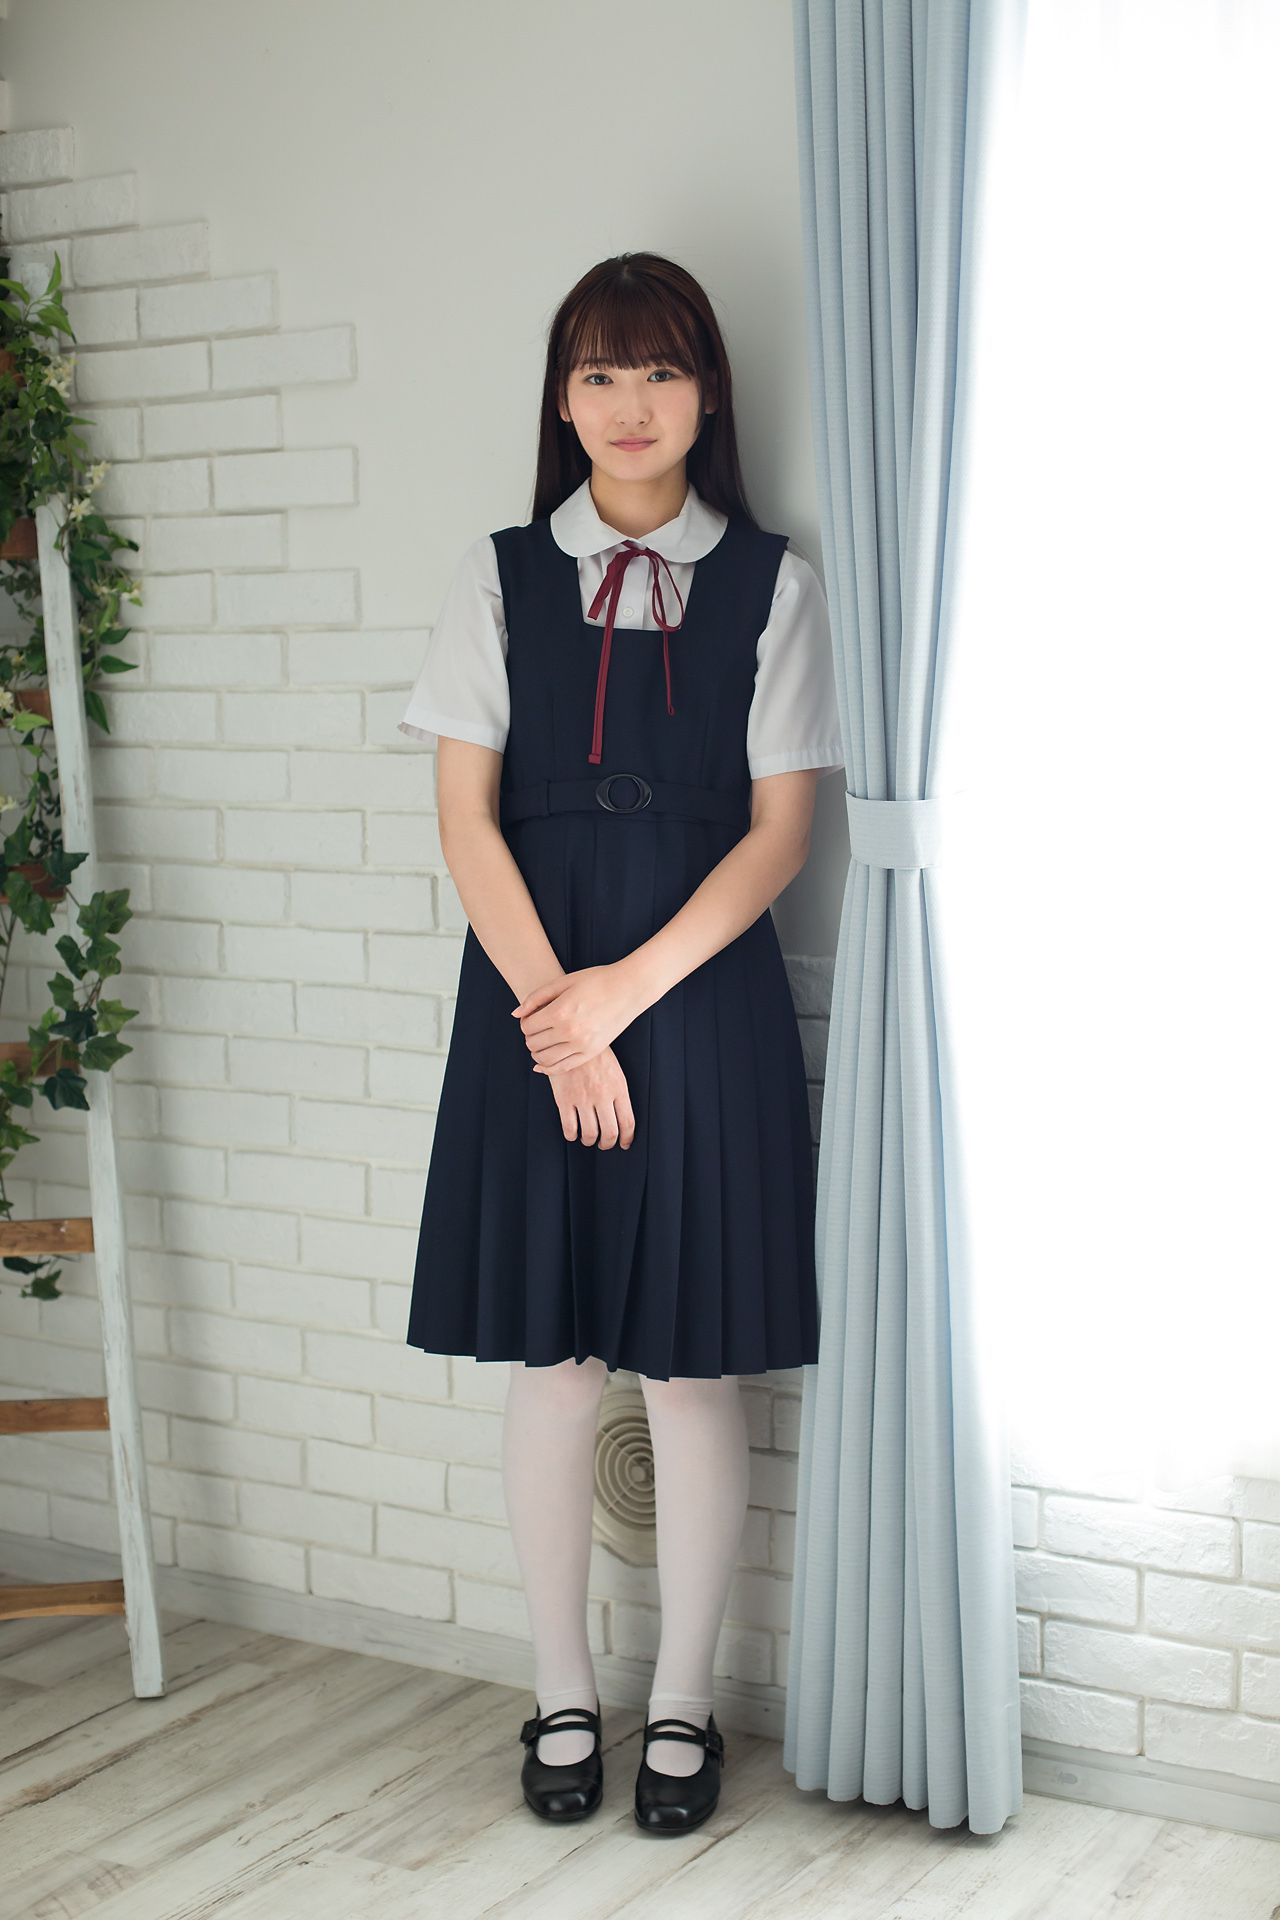 taotuhome[Minisuka.tv] 近藤あさみ 白丝学生装 - Limited Gallery 18.1第2张